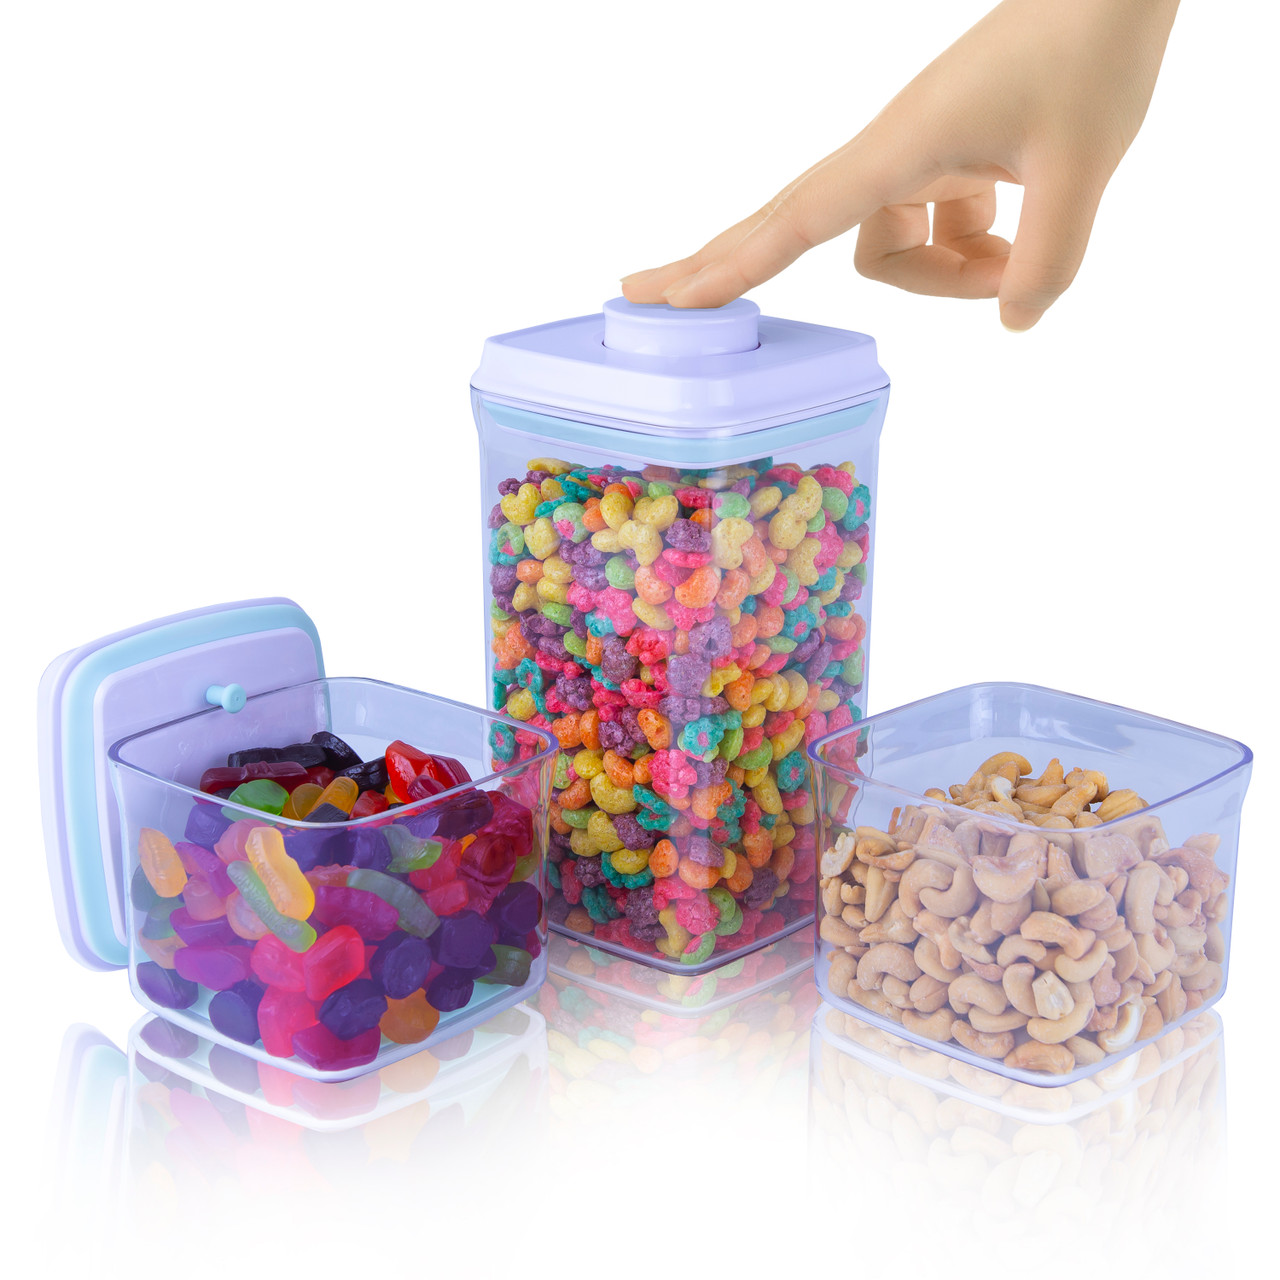 Stackable 3-oz Airtight Canister